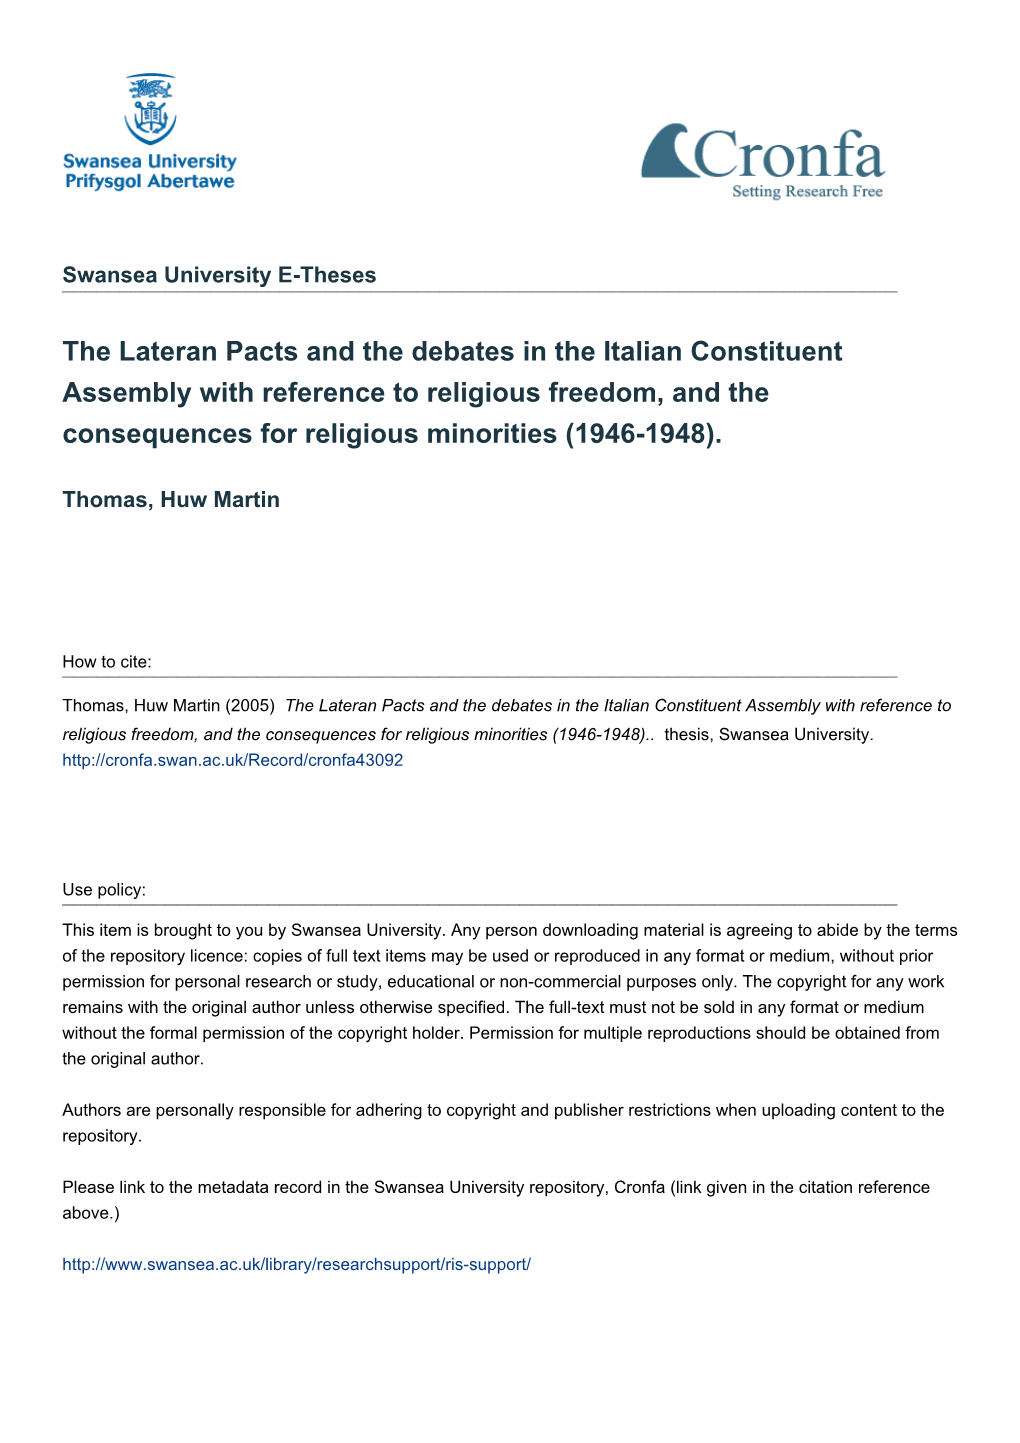 The Lateran Pacts and the Debates in the Italian Constituent Assembly with Reference to Religious Freedom, and the Consequences for Religious Minorities (1946-1948)